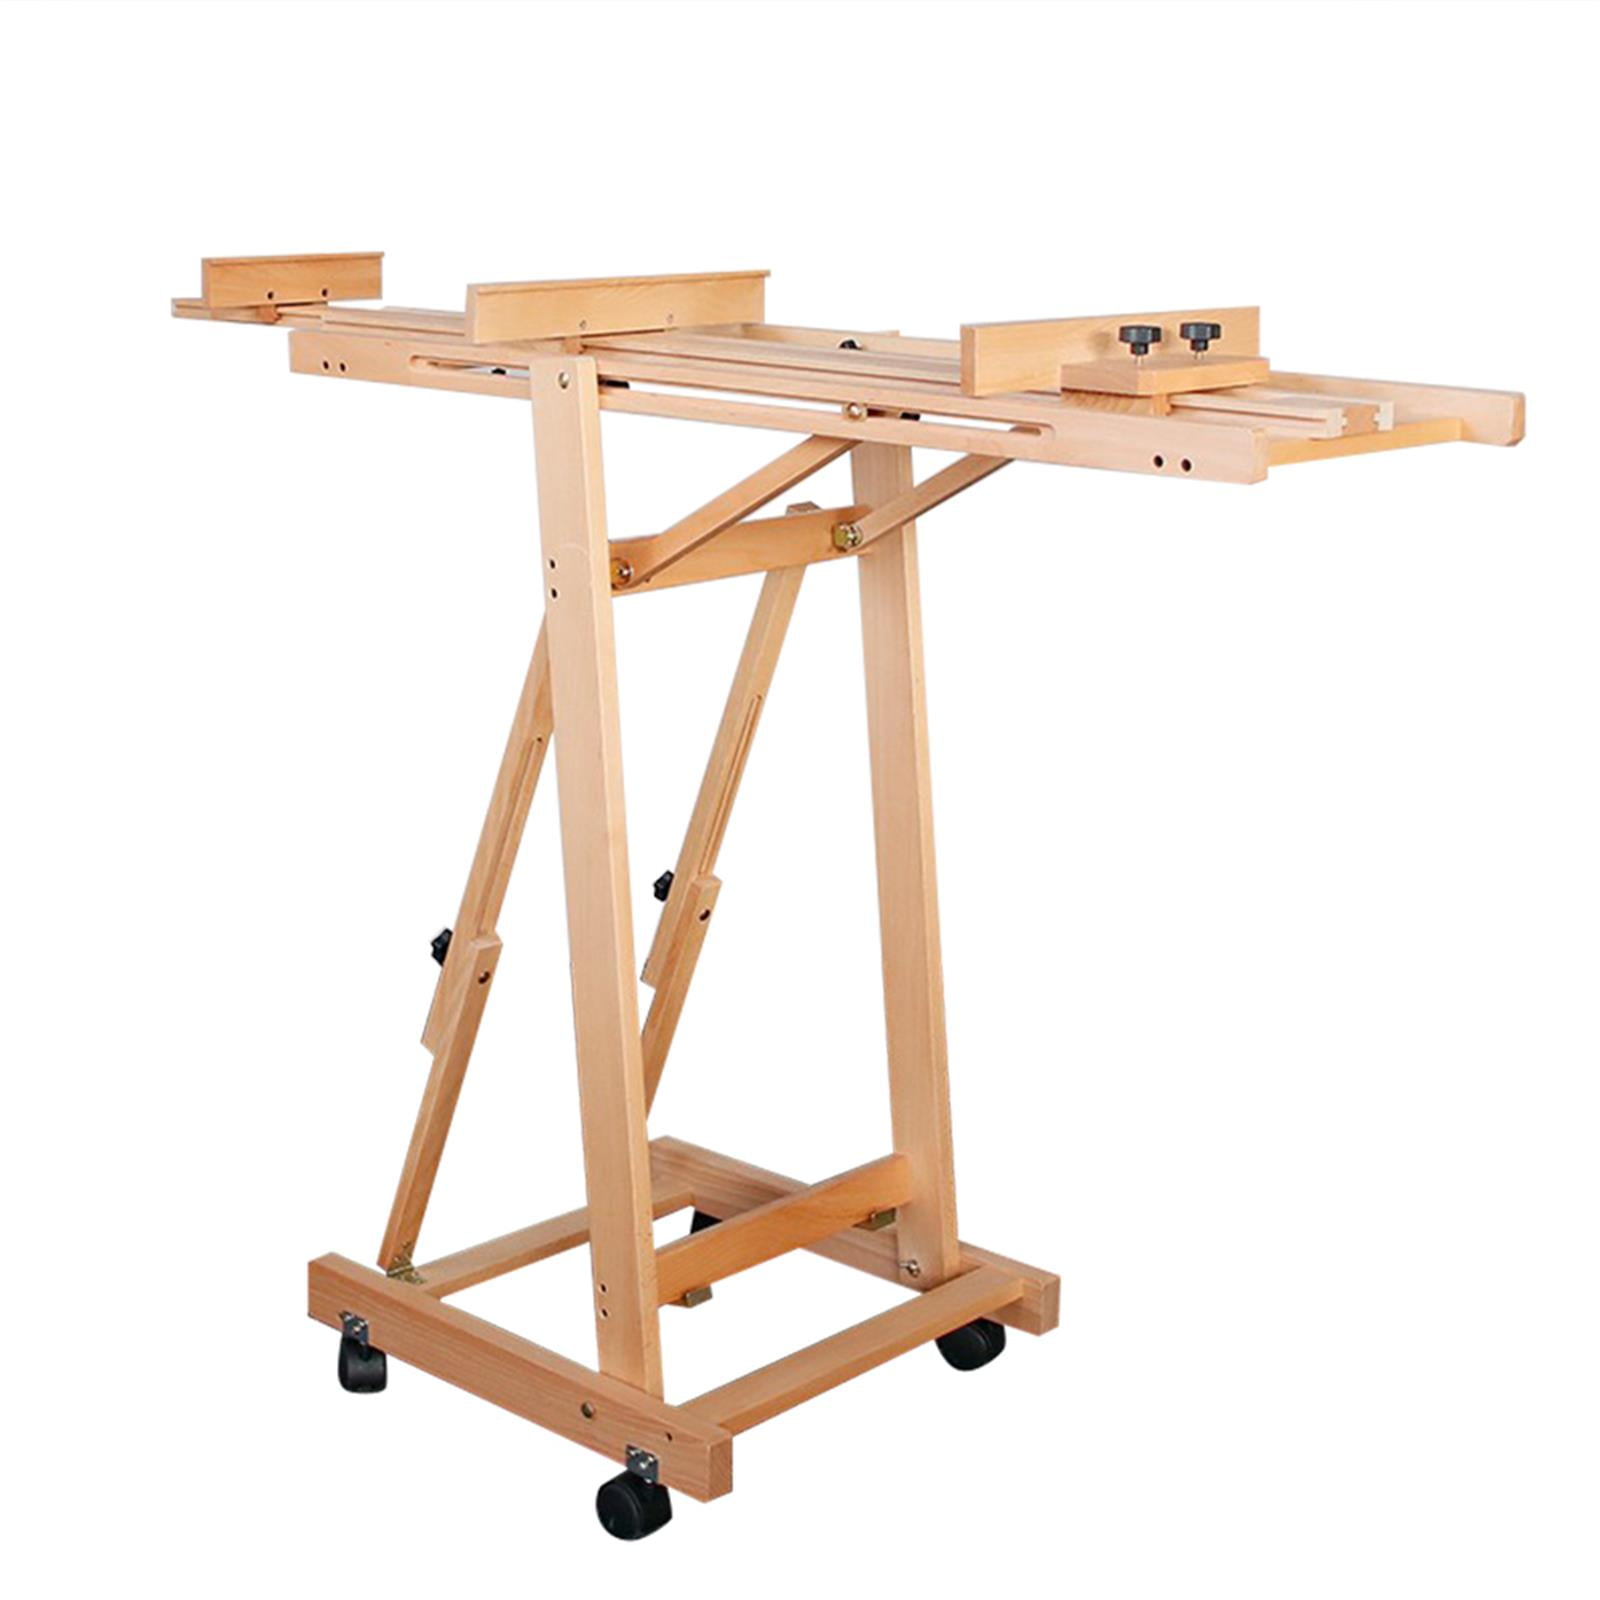 TYAGY Desk Easel Artist Easels for Painting, Multifonctional Beech Art  Easel Drawing Stand Folding and Lifting Easel Board for PaintingExhibition